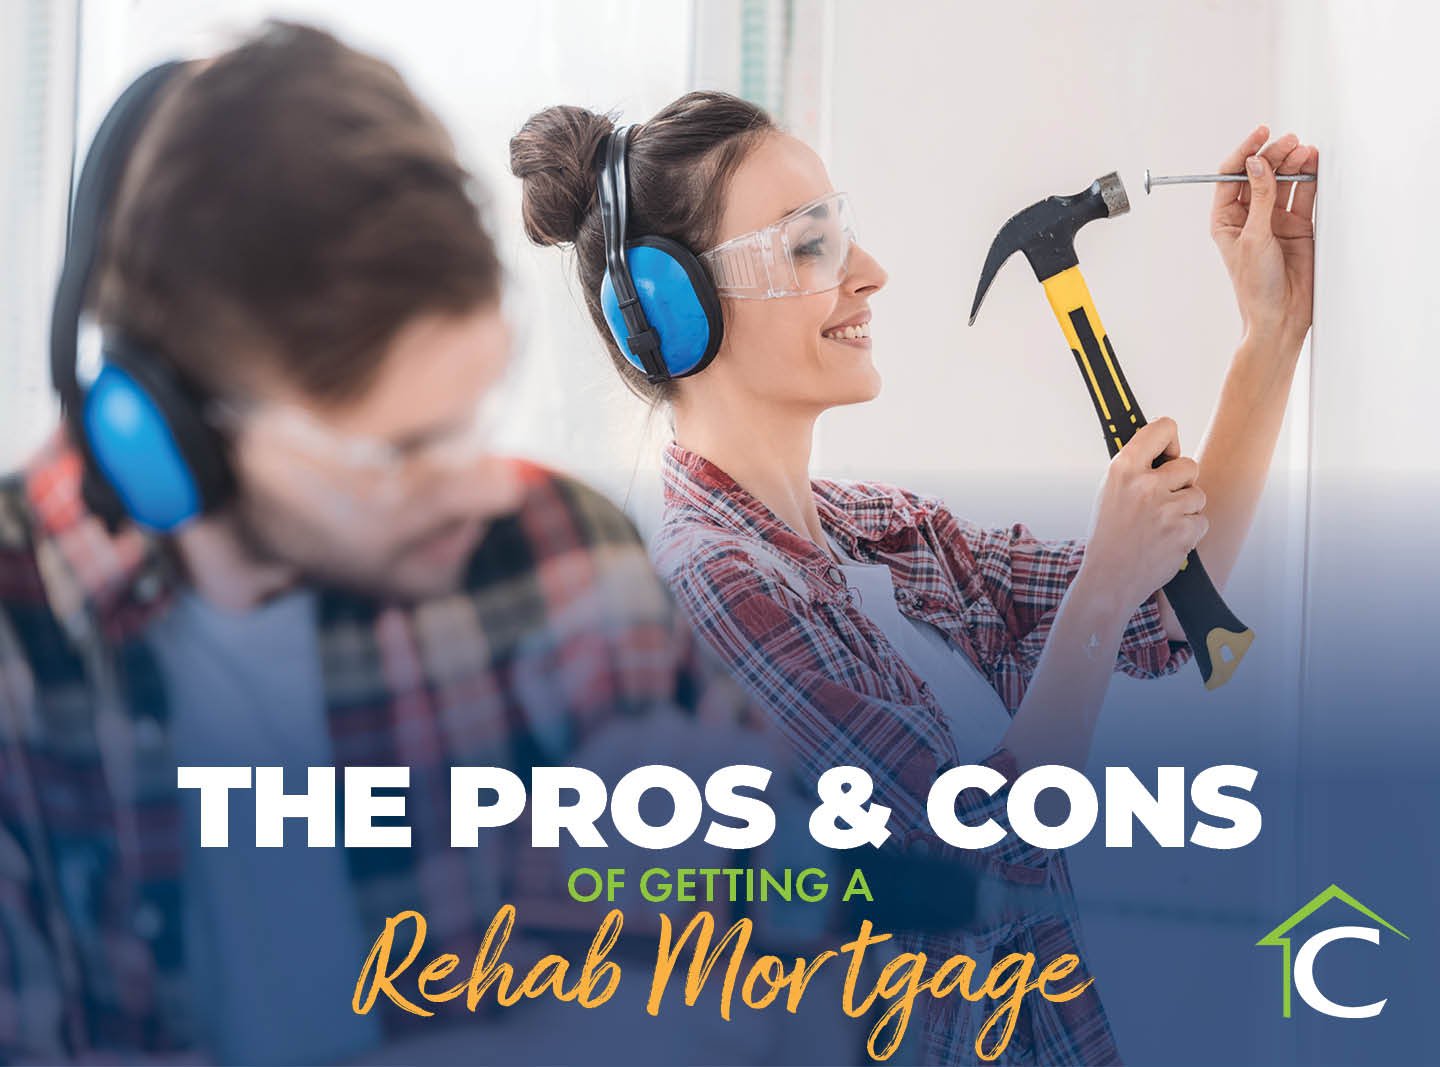 The Pros & Cons of Getting a Rehab Mortgage